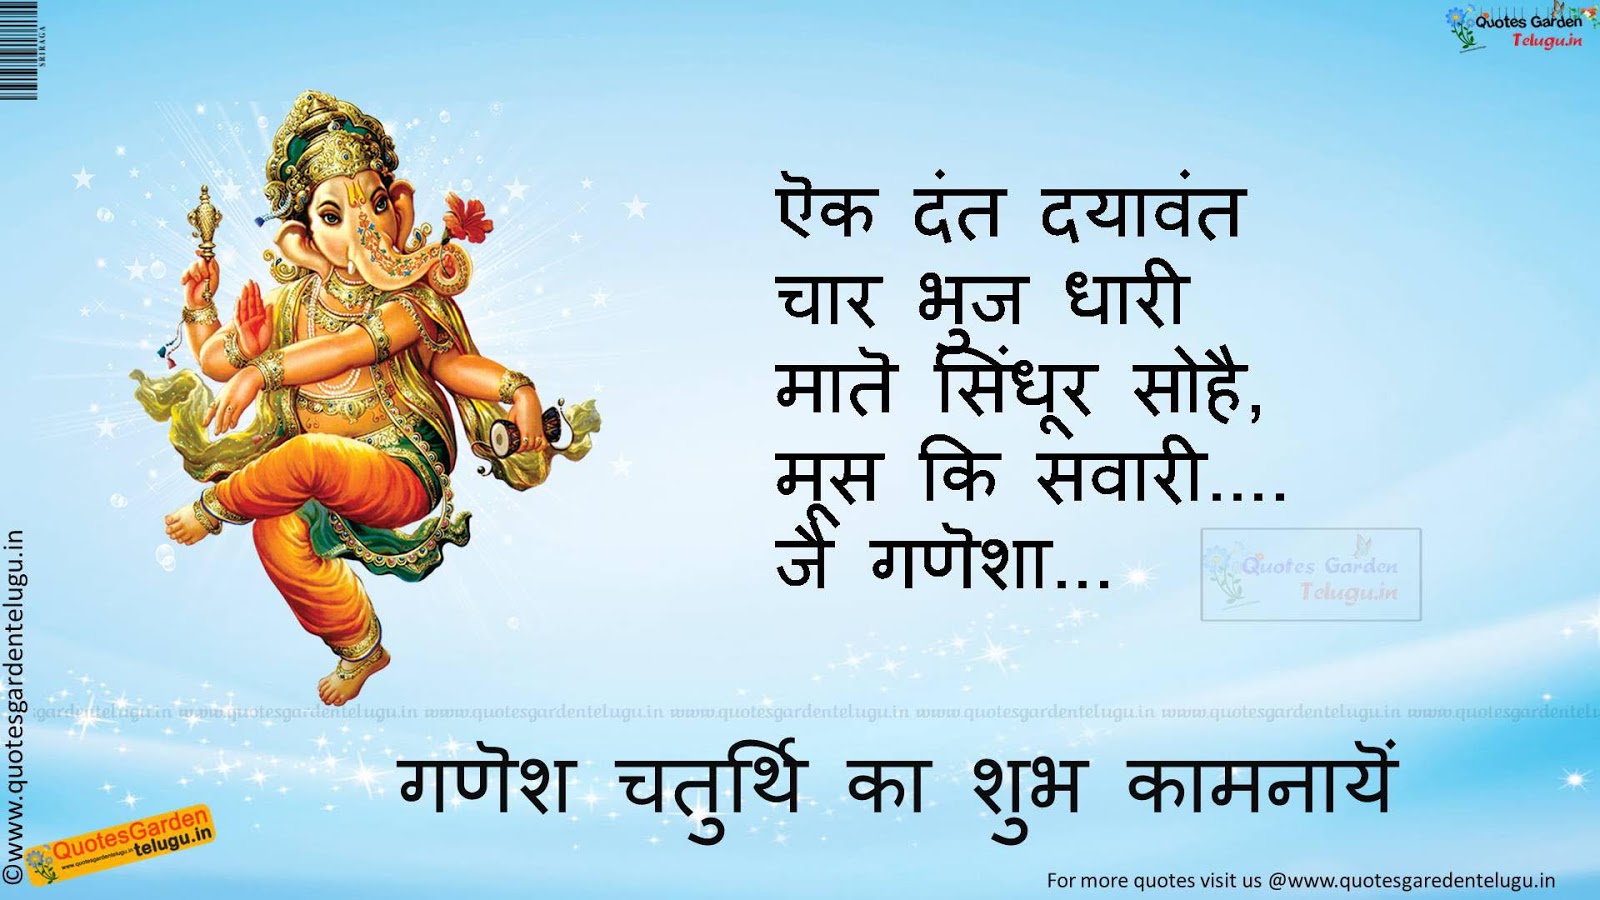 Happy ganesh chaturthi Hindi Quotes images wallpapers | QUOTES ...